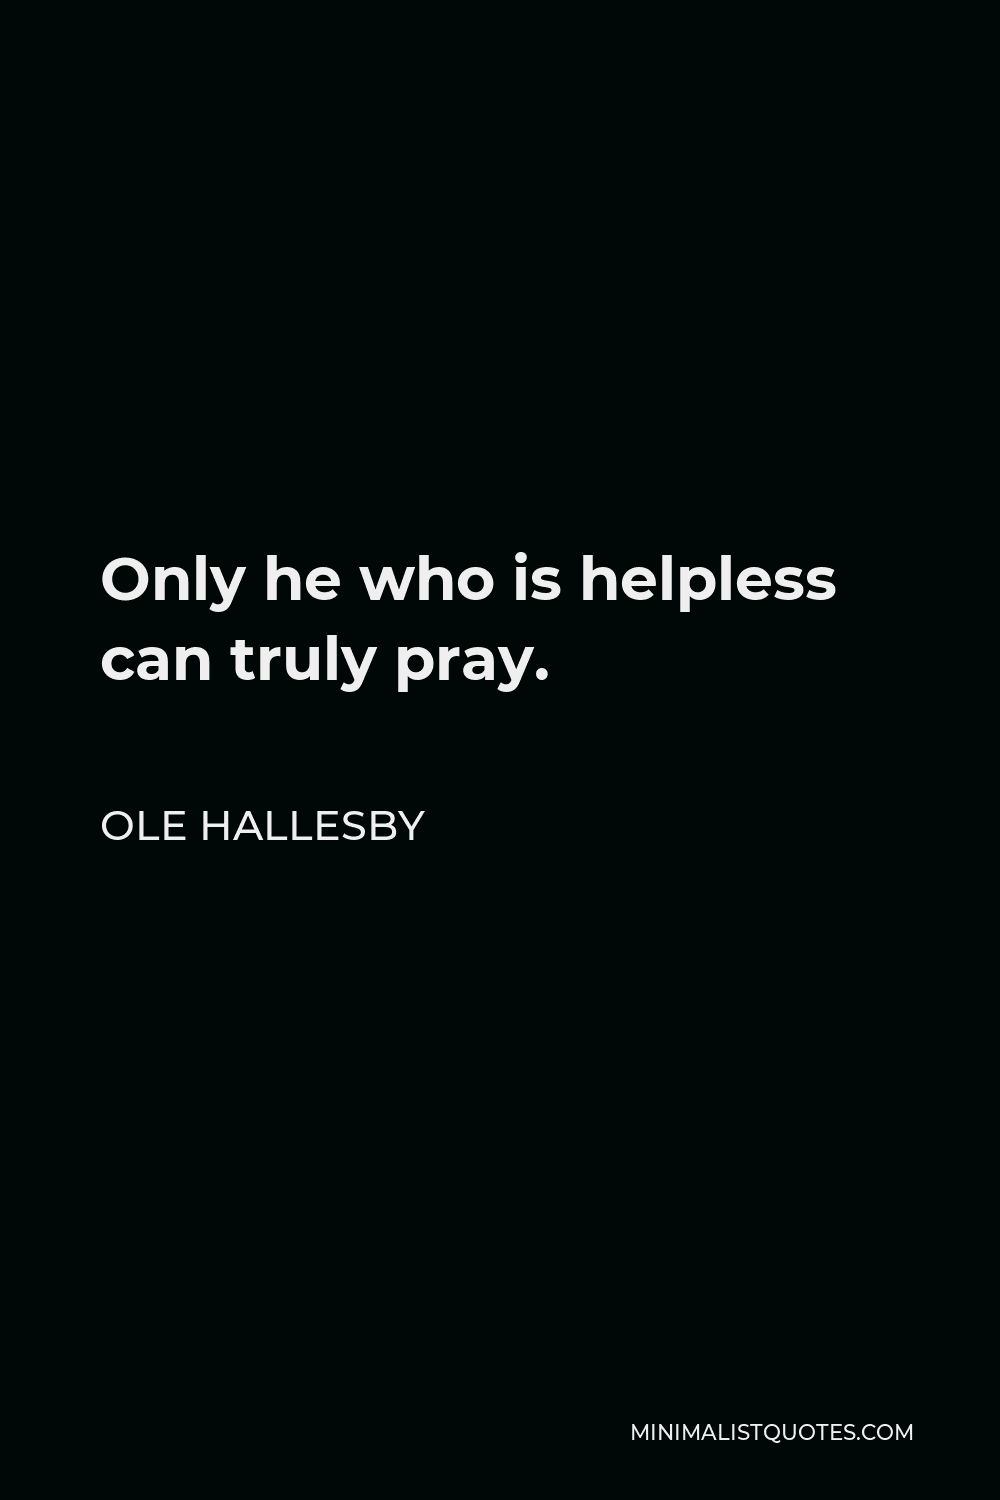 Ole Hallesby Quote: Only he who is helpless can truly pray.